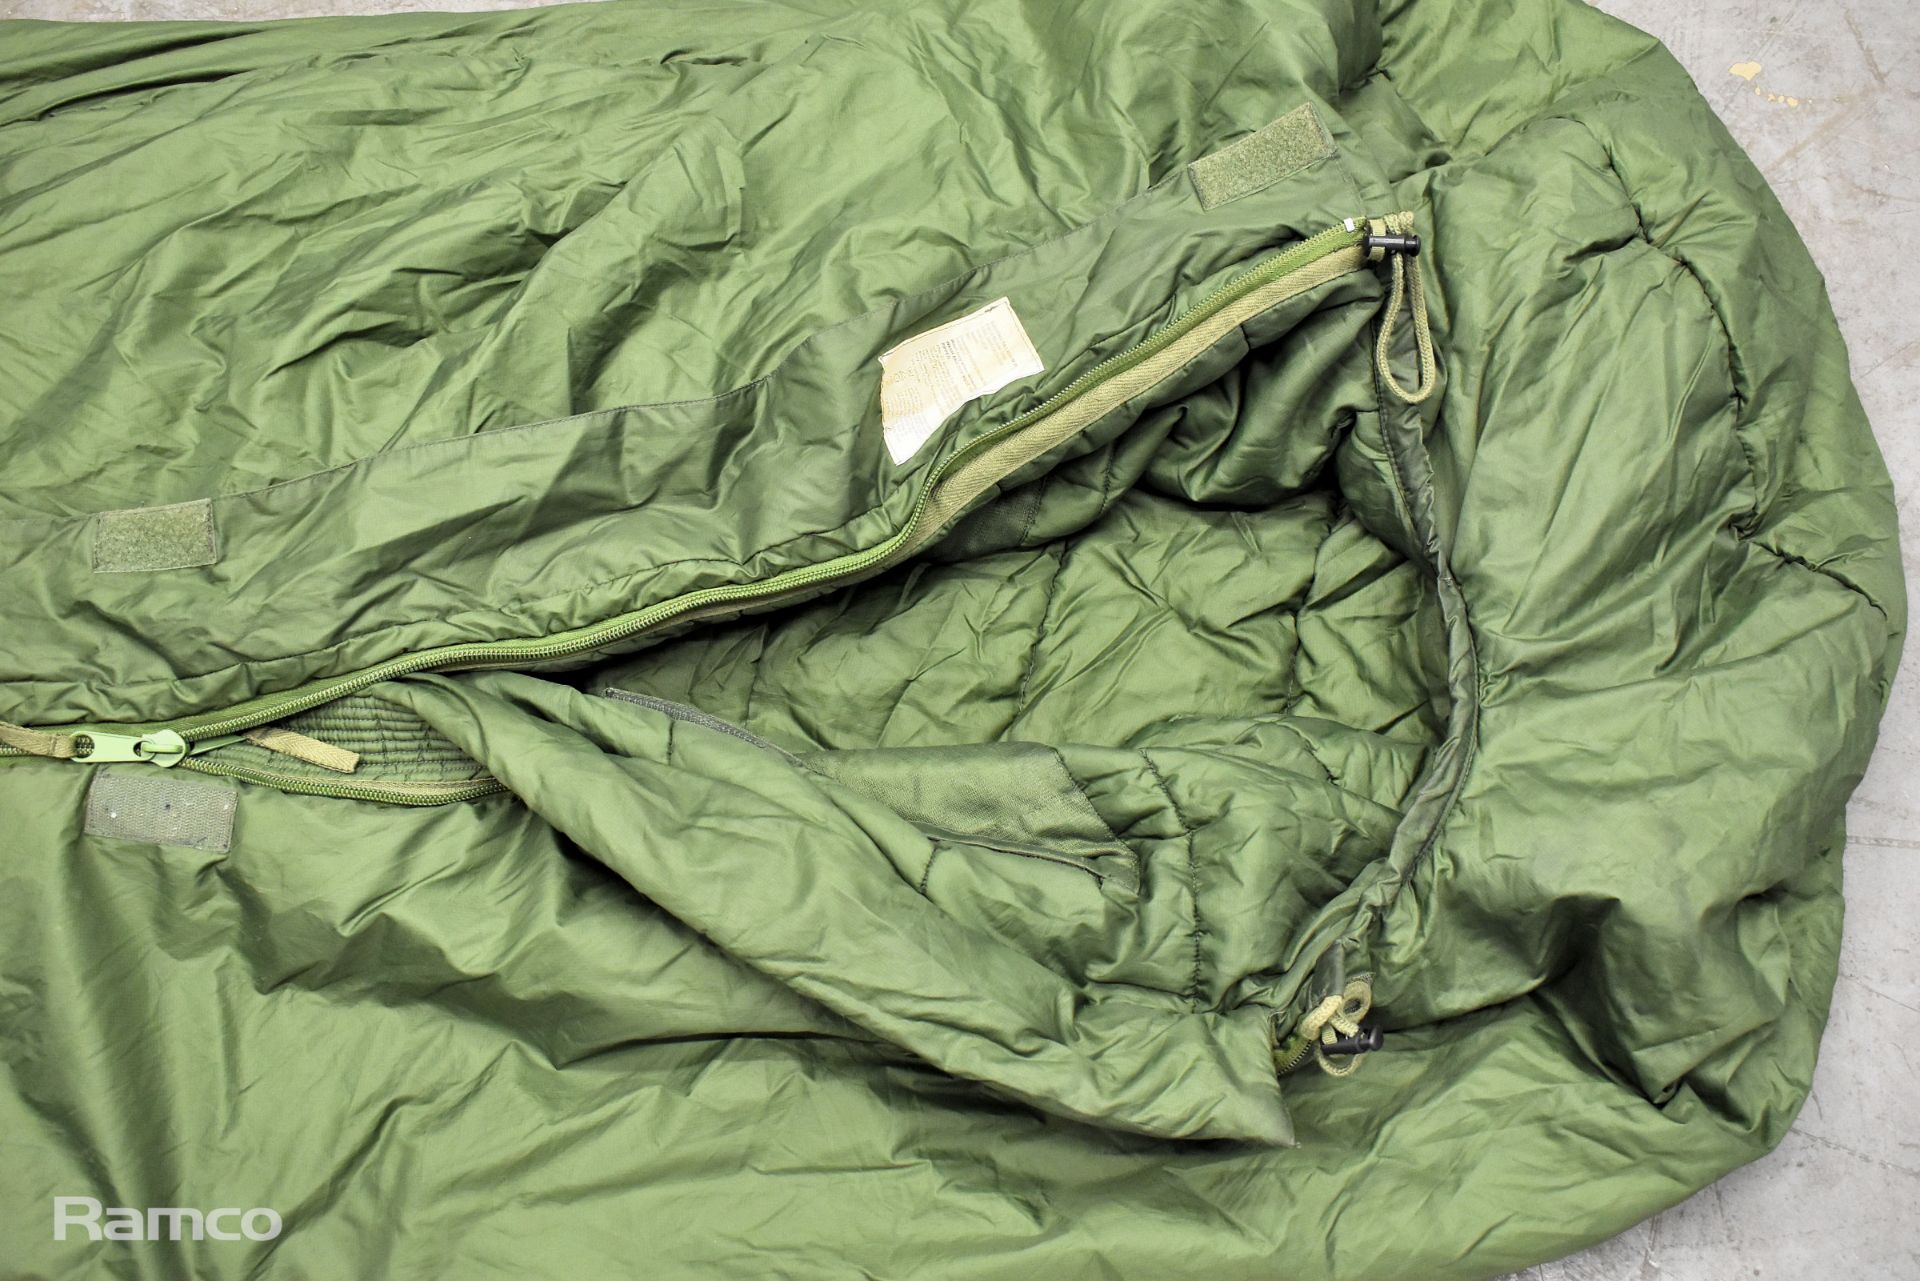 49x Sleeping bags - mixed grades and sizes - Image 8 of 8